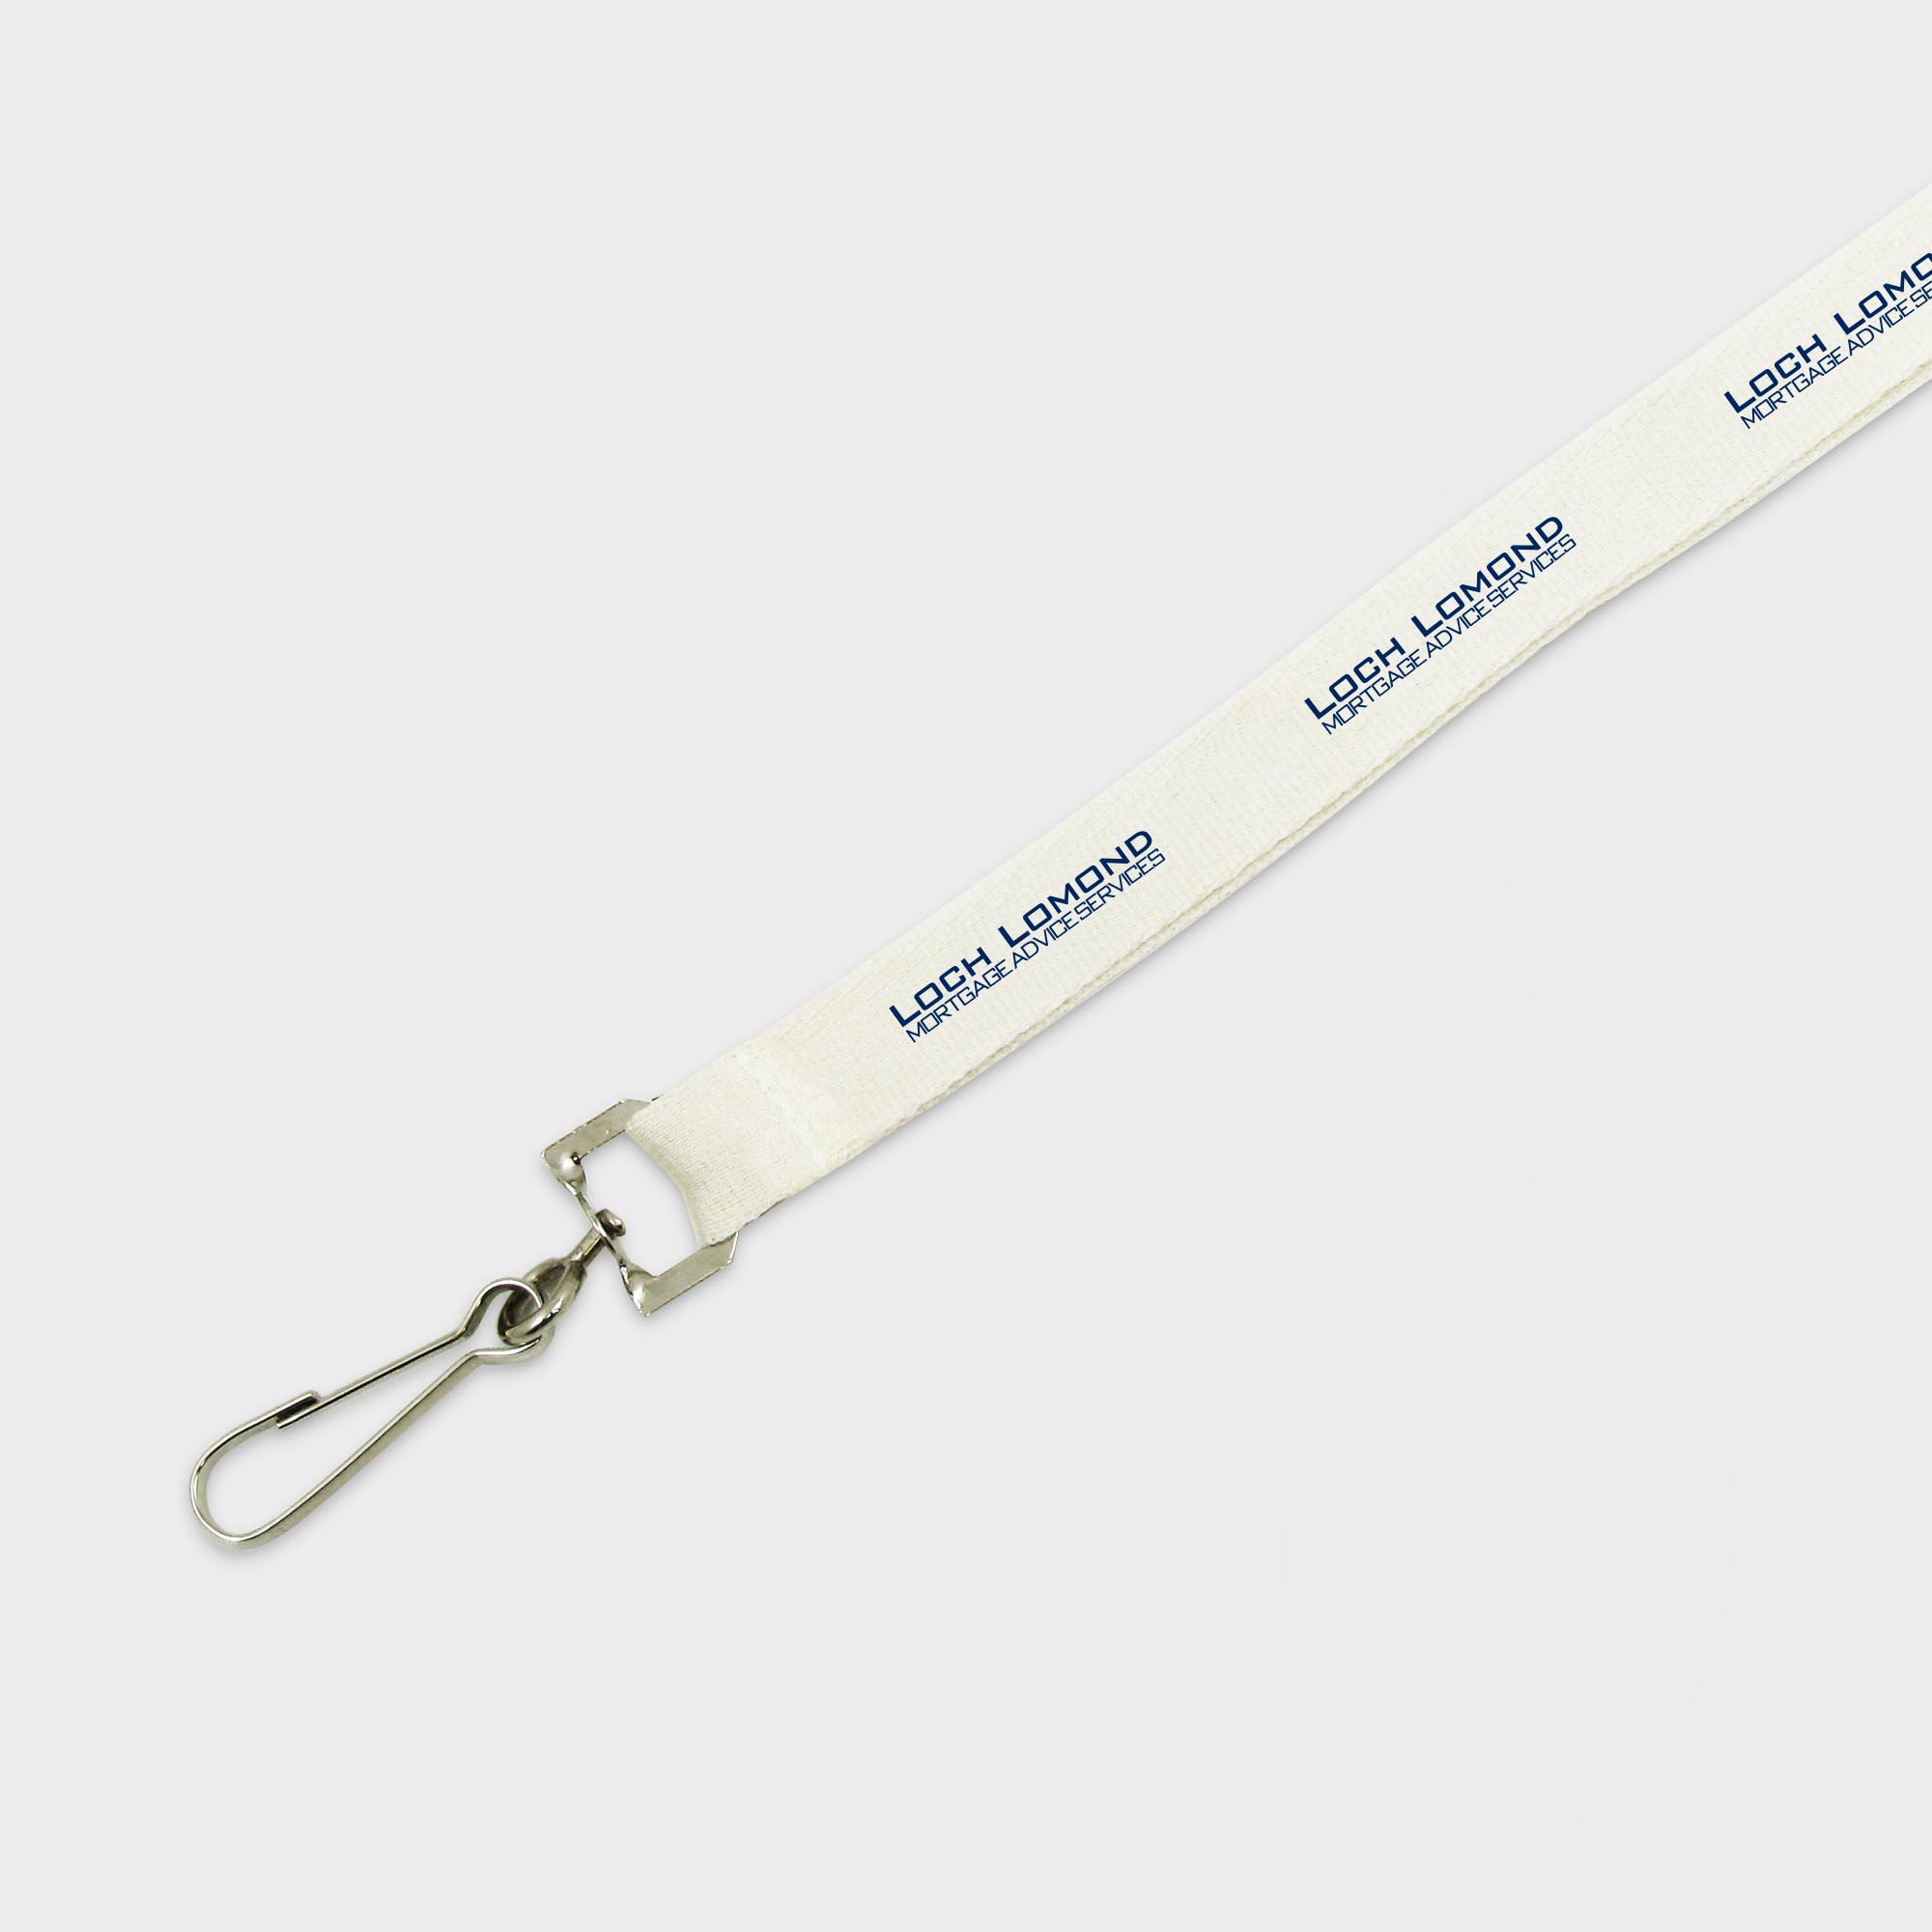 The Green & Good 15mm Lanyard is made from sustainable plant fibre. A great eco-friendly alternative to a standard lanyard. Biodegradable and available in a standard off-white colour. Pantone matching of lanyard possible (Subject to MOQ). Standard Dog-Clip. Other clip options, short release and safety breaks are available. Please contact us for more information.